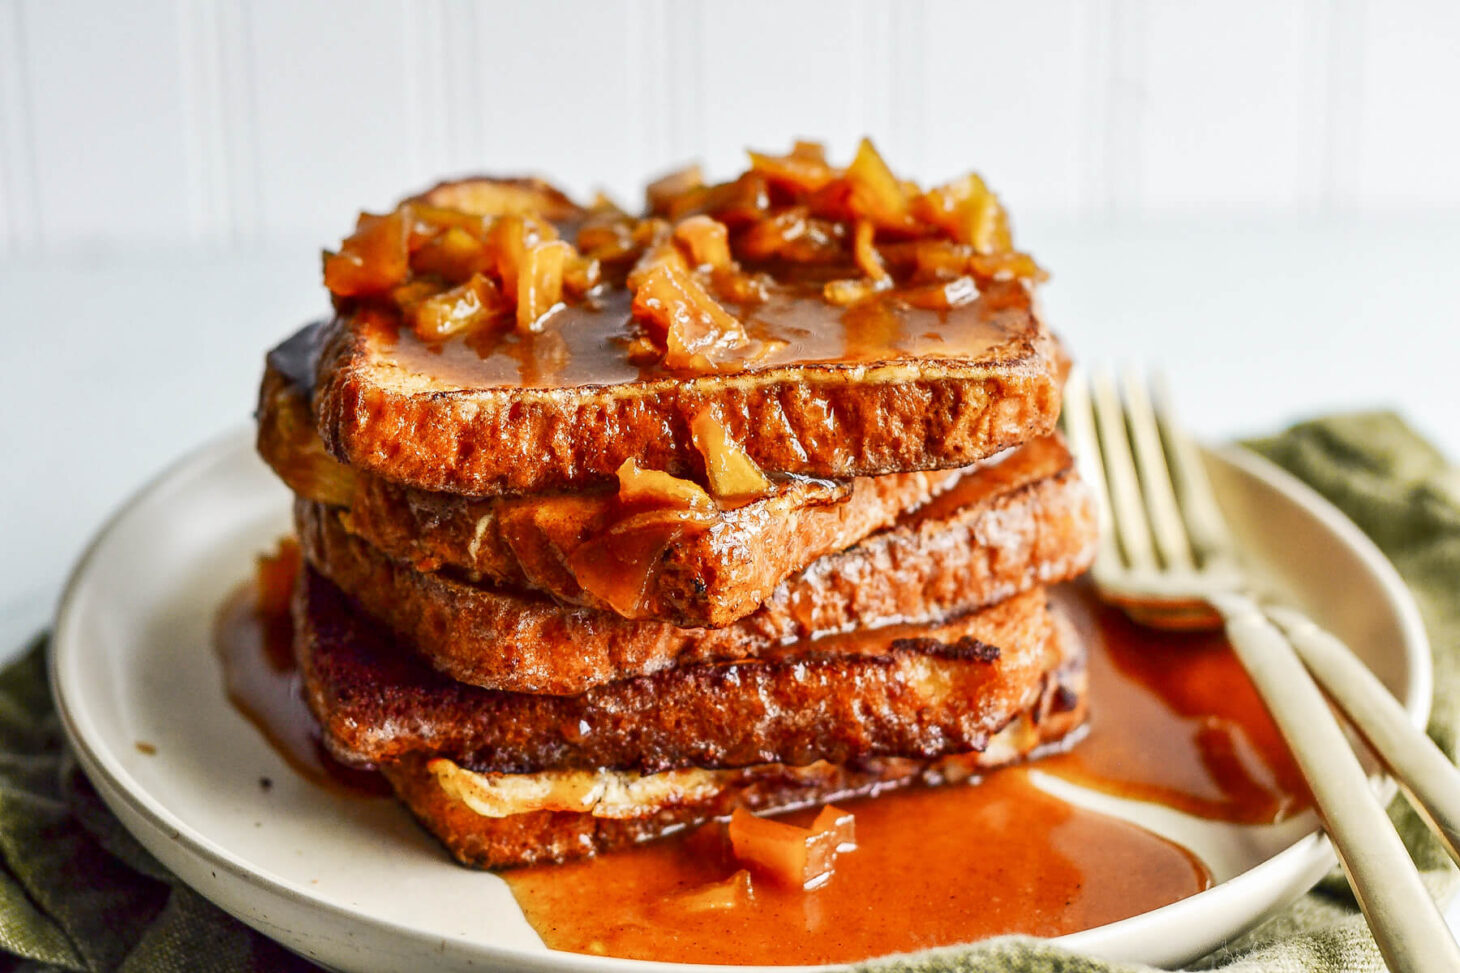 A stack of golden apple French toast topped with a rich caramel sauce on a white plate.